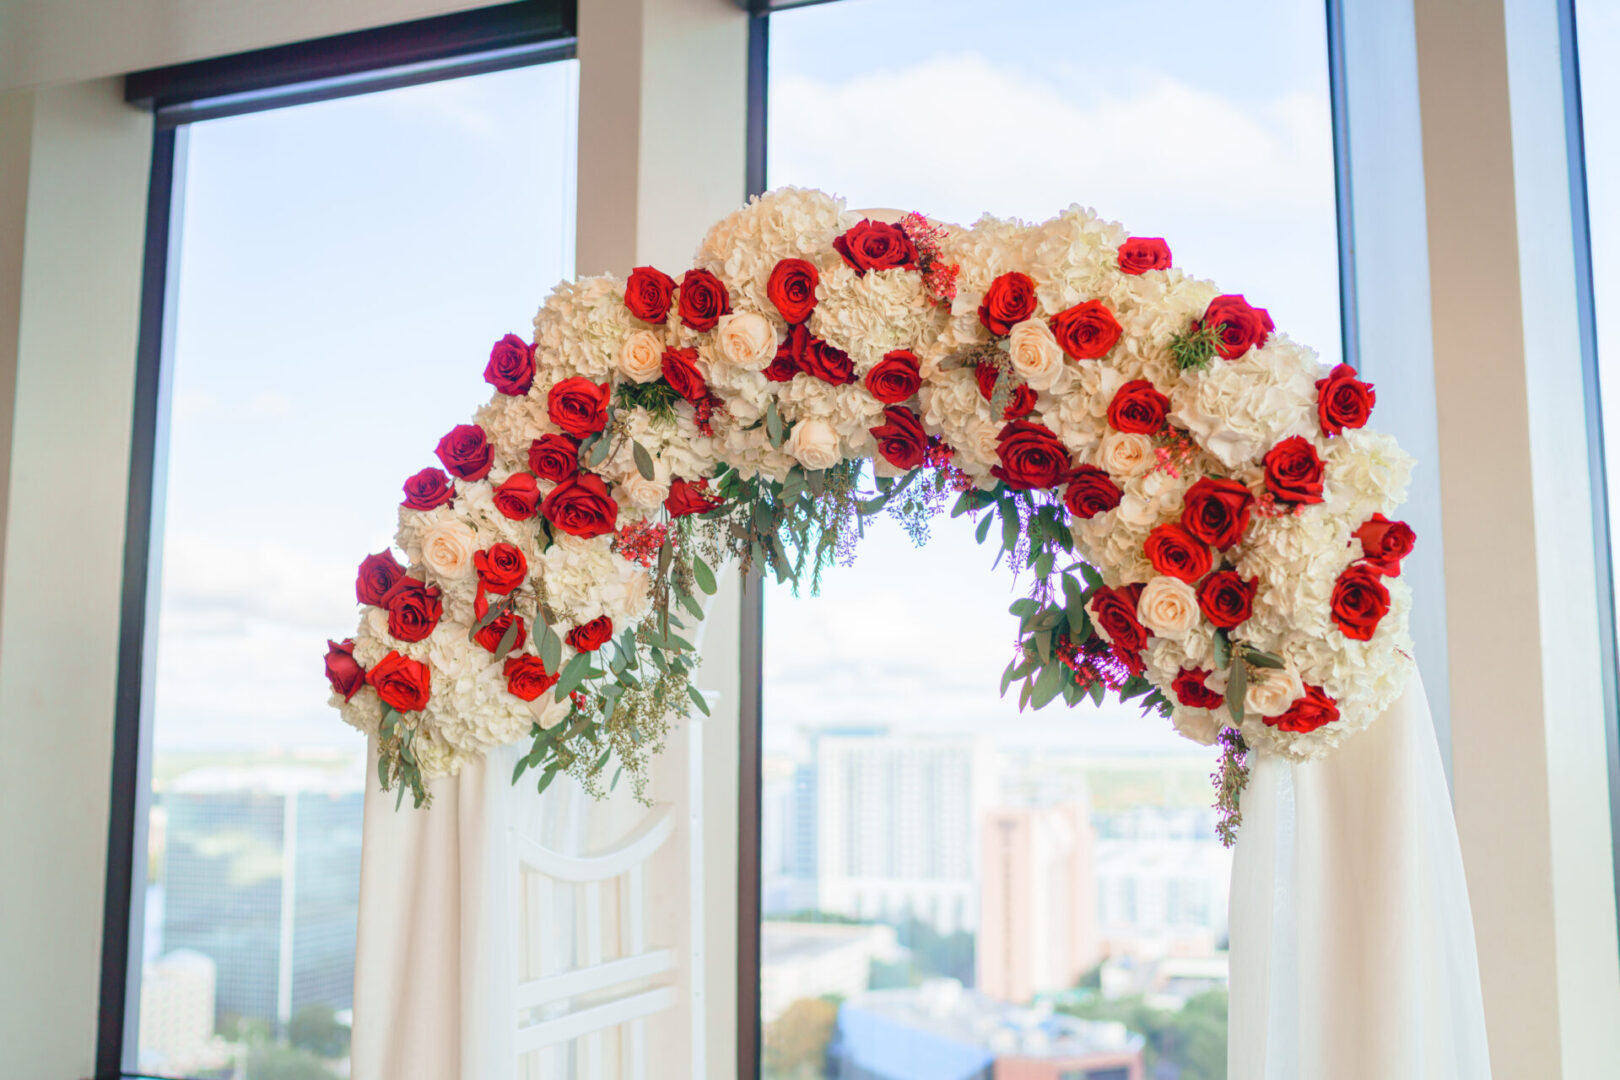 A Floral Arch With White and Red Roses